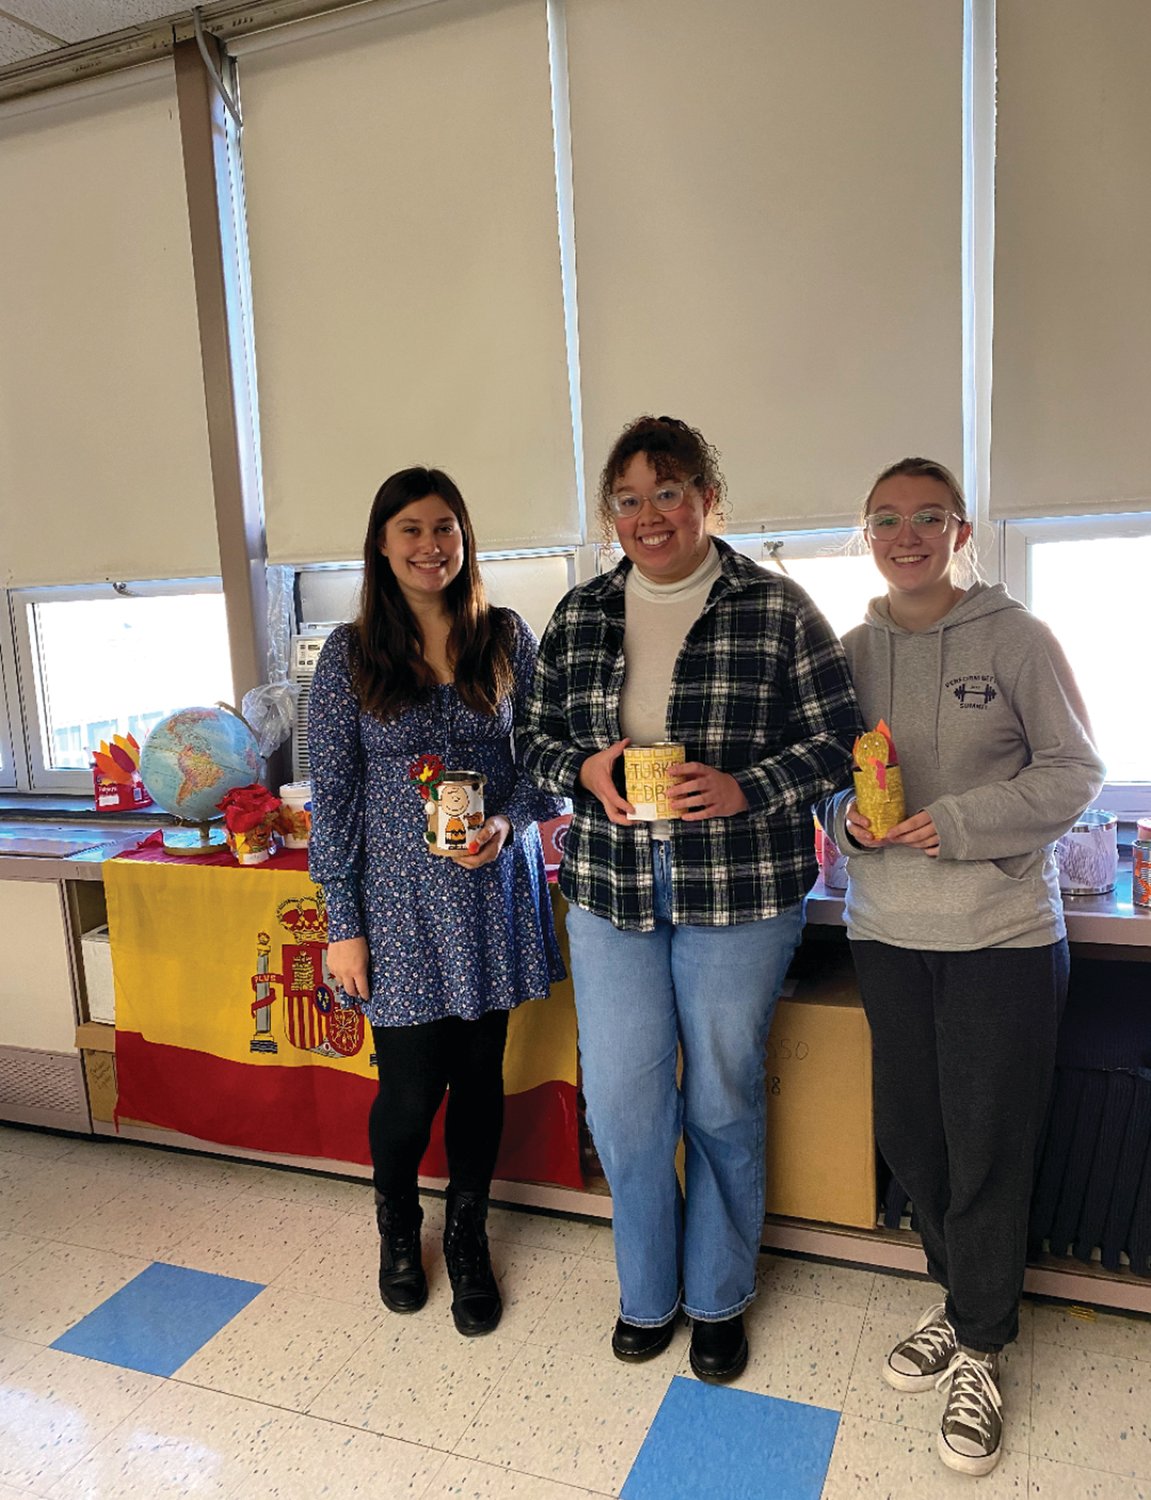 From left to right, NHS President Glorianna Crichlow, NHS Vice President Emily Patenaude, and NHS Historian Mackenzie Hanna, members of JHS National Honor Society, pose with their cans.